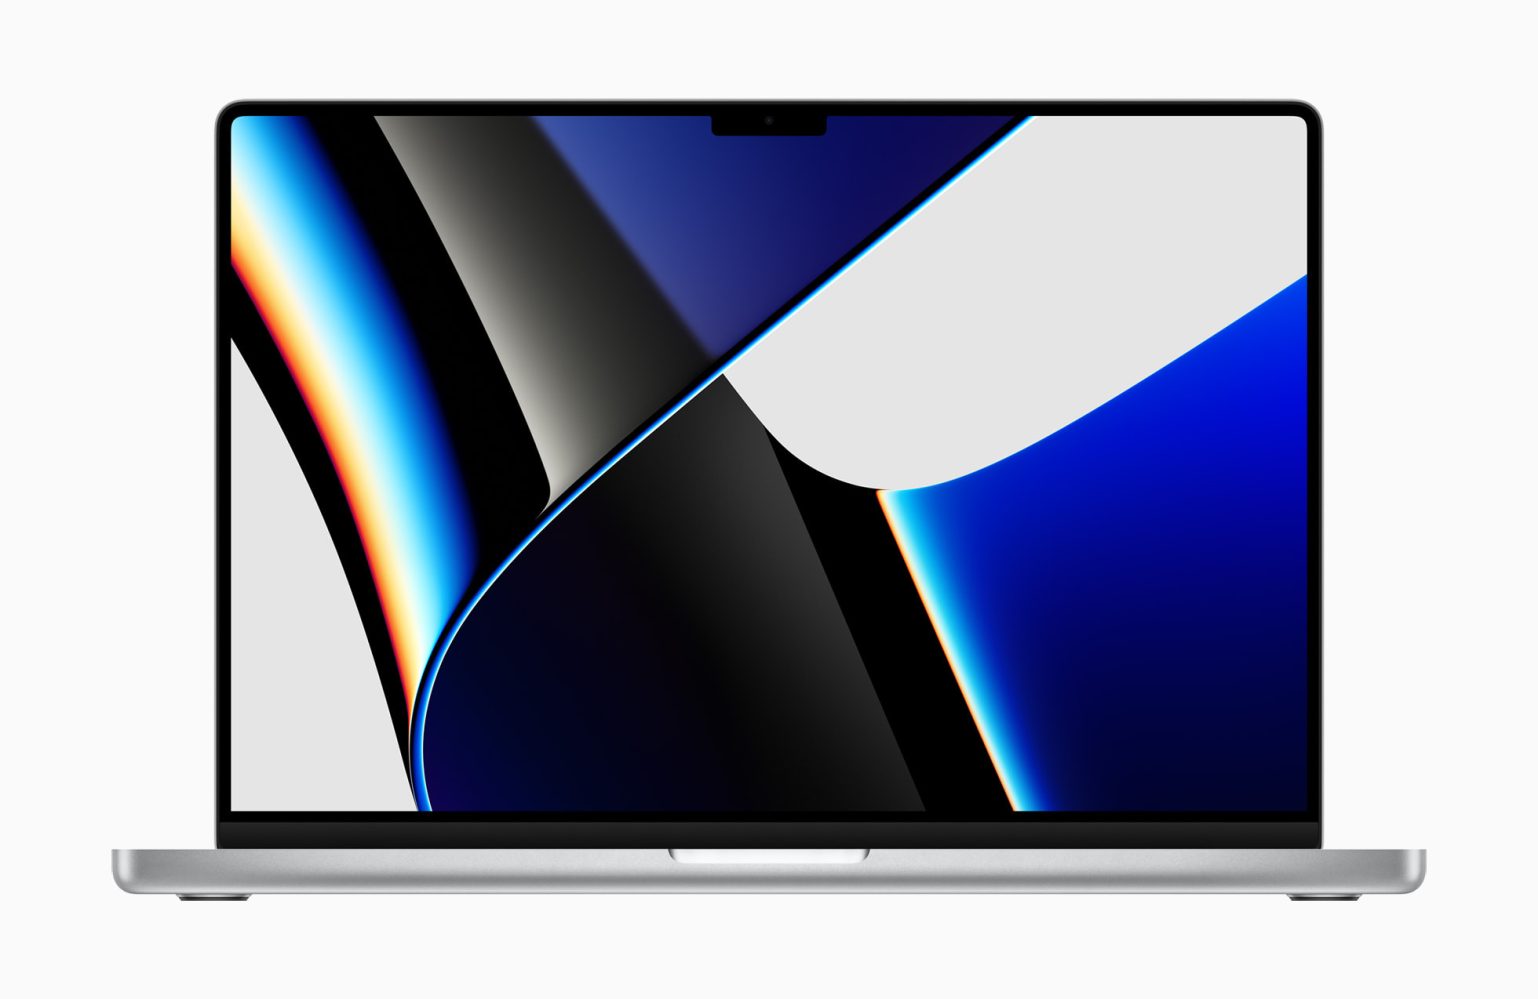 Download the new 2021 MacBook Pro wallpapers right here - 9to5Mac